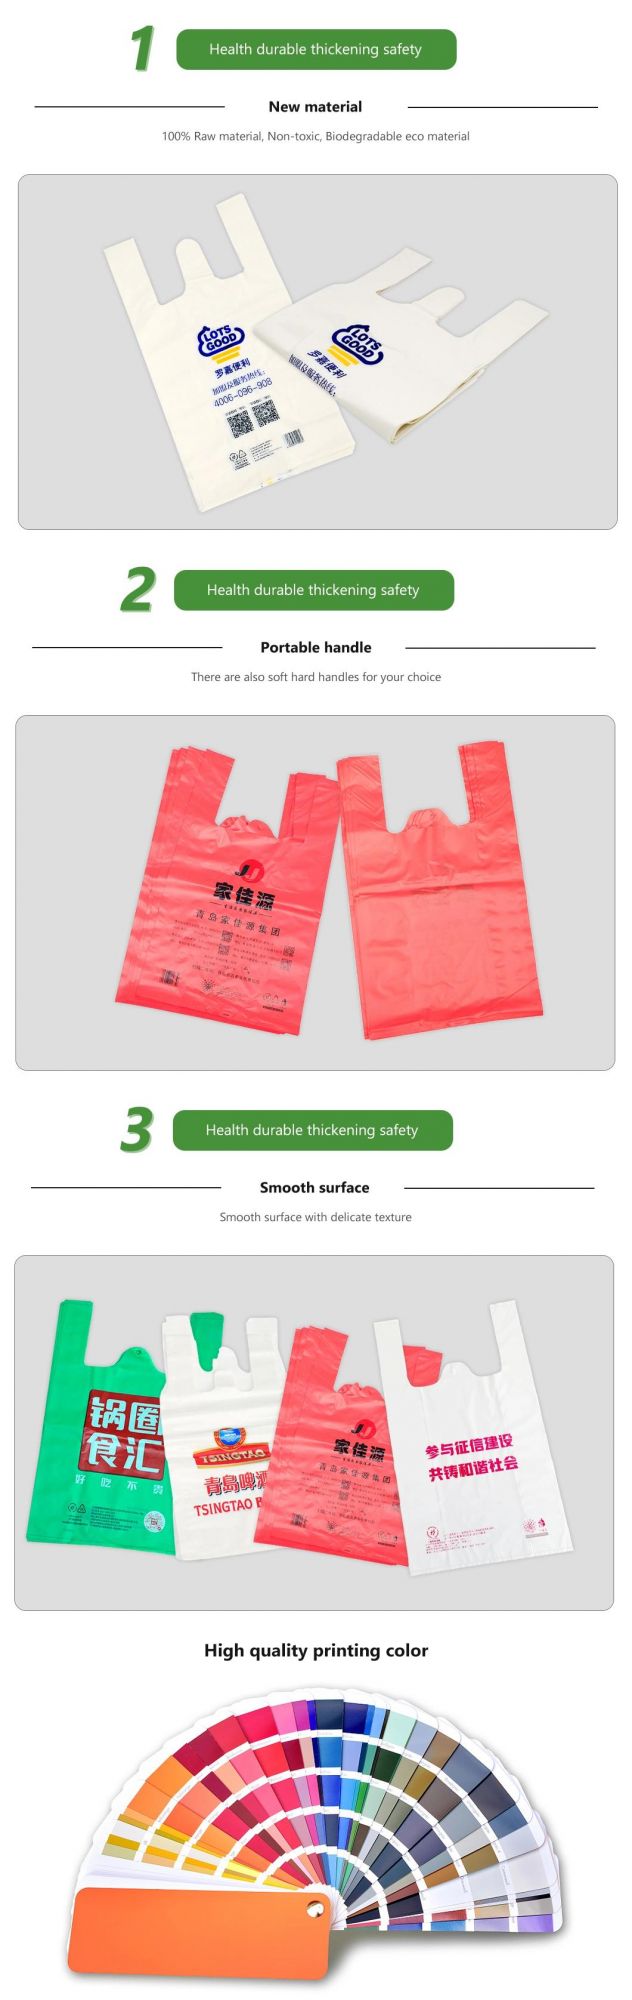 100% Biodegradable Packing Bags T-Shirt Bags